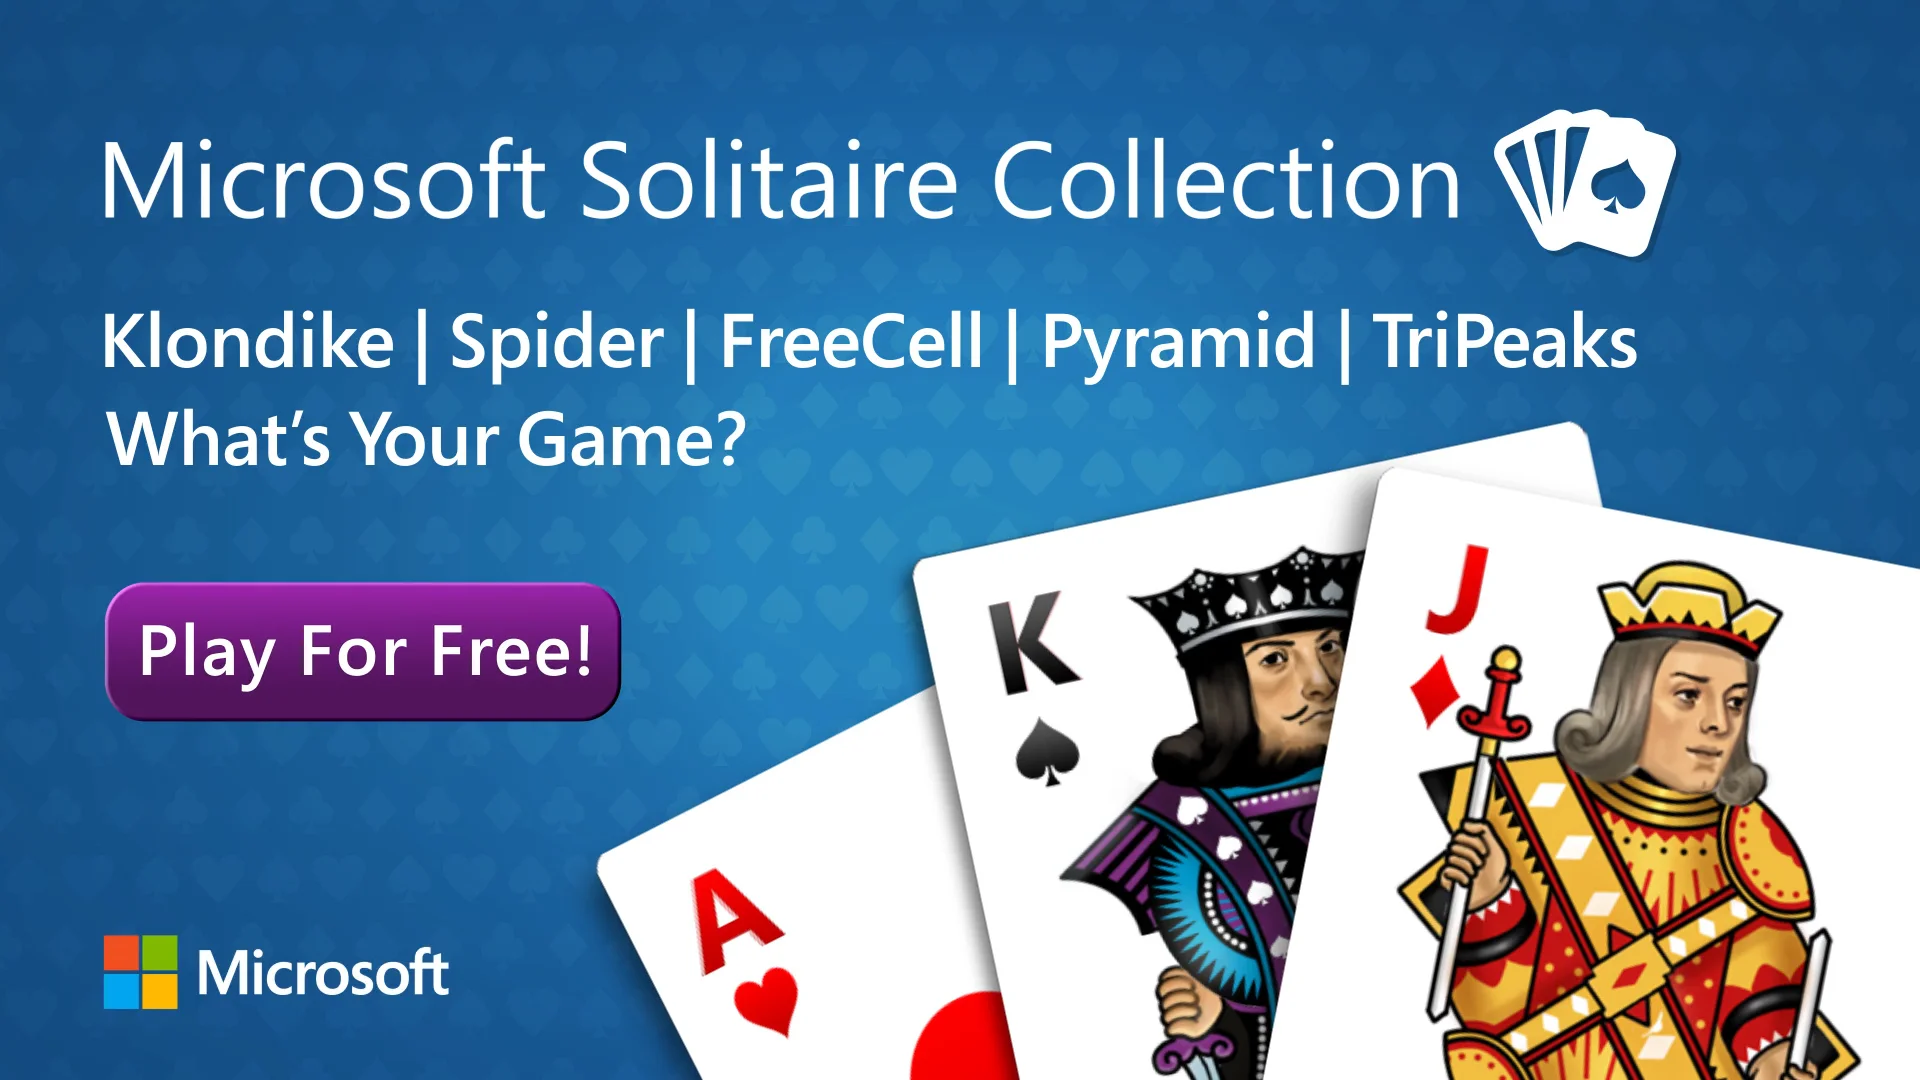 Microsoft Solitaire Collection app ads on Vimeo